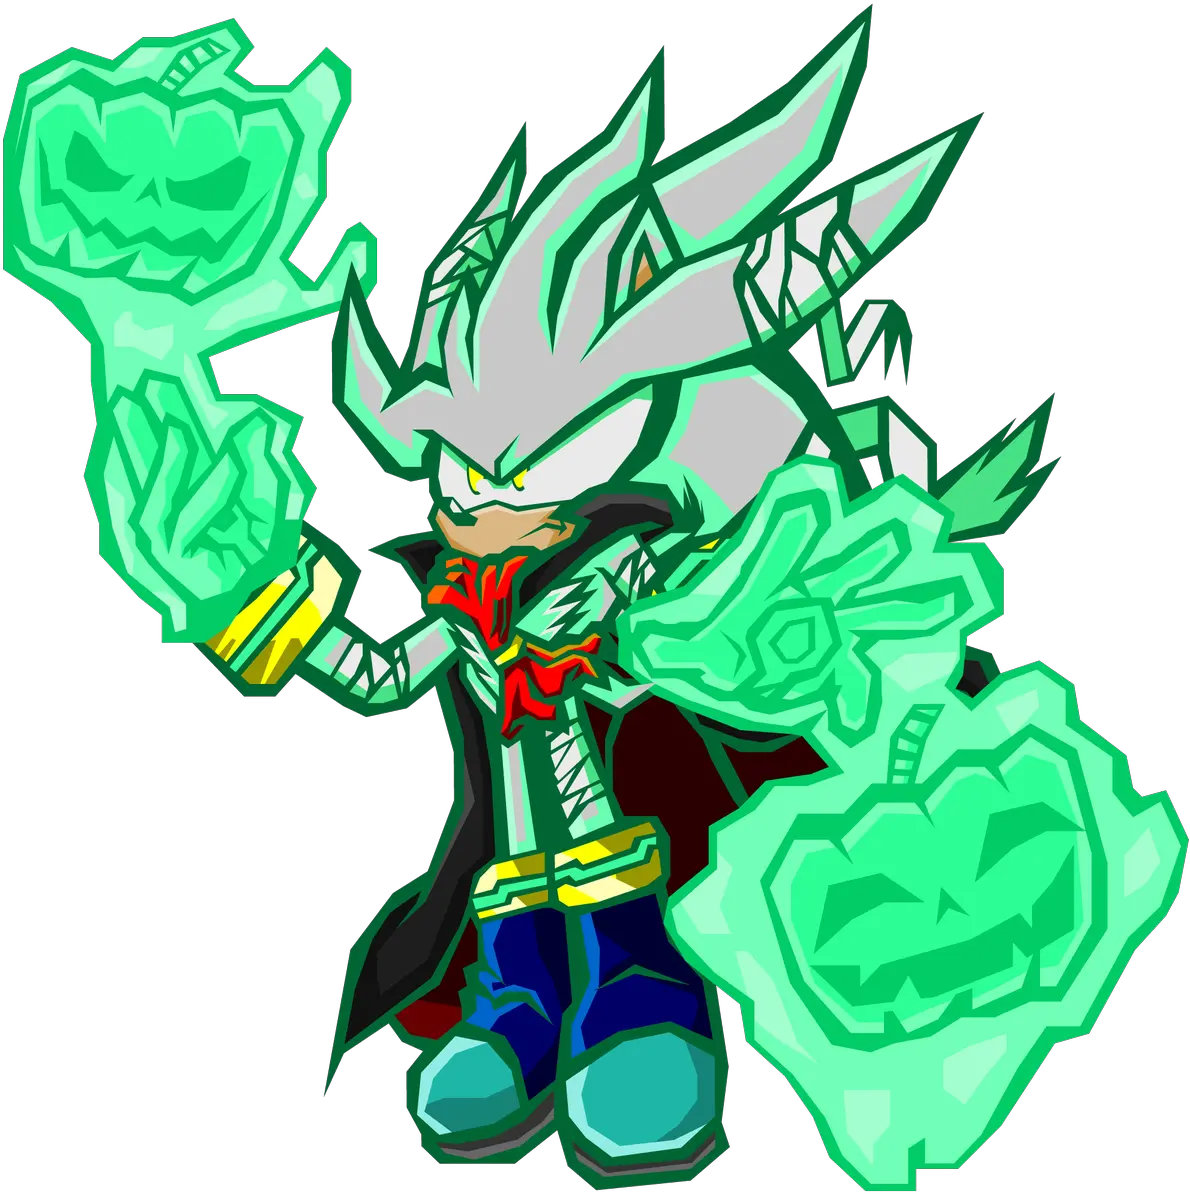 Download Cerberus Cartoon Full Size Png Image Silver The Hedgehog Comic Drawing Cerberus Png